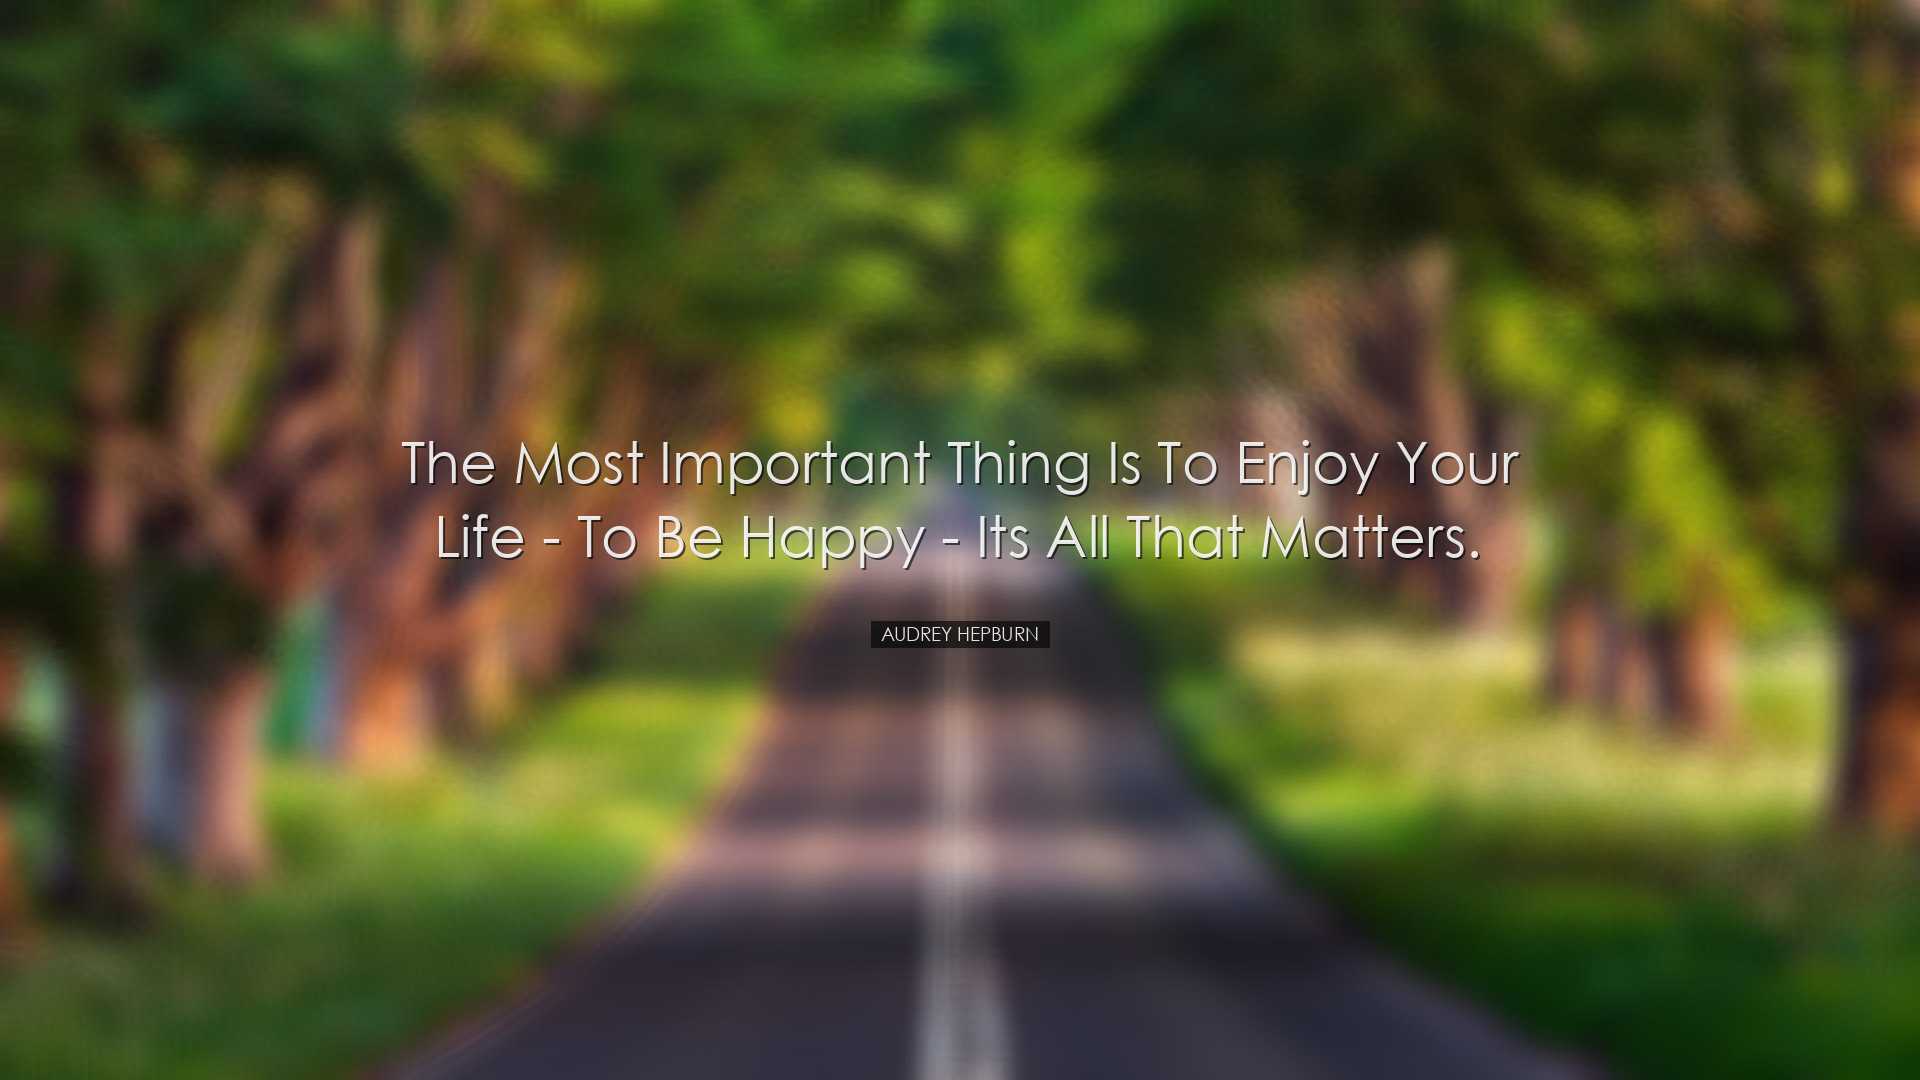 The most important thing is to enjoy your life - to be happy - its